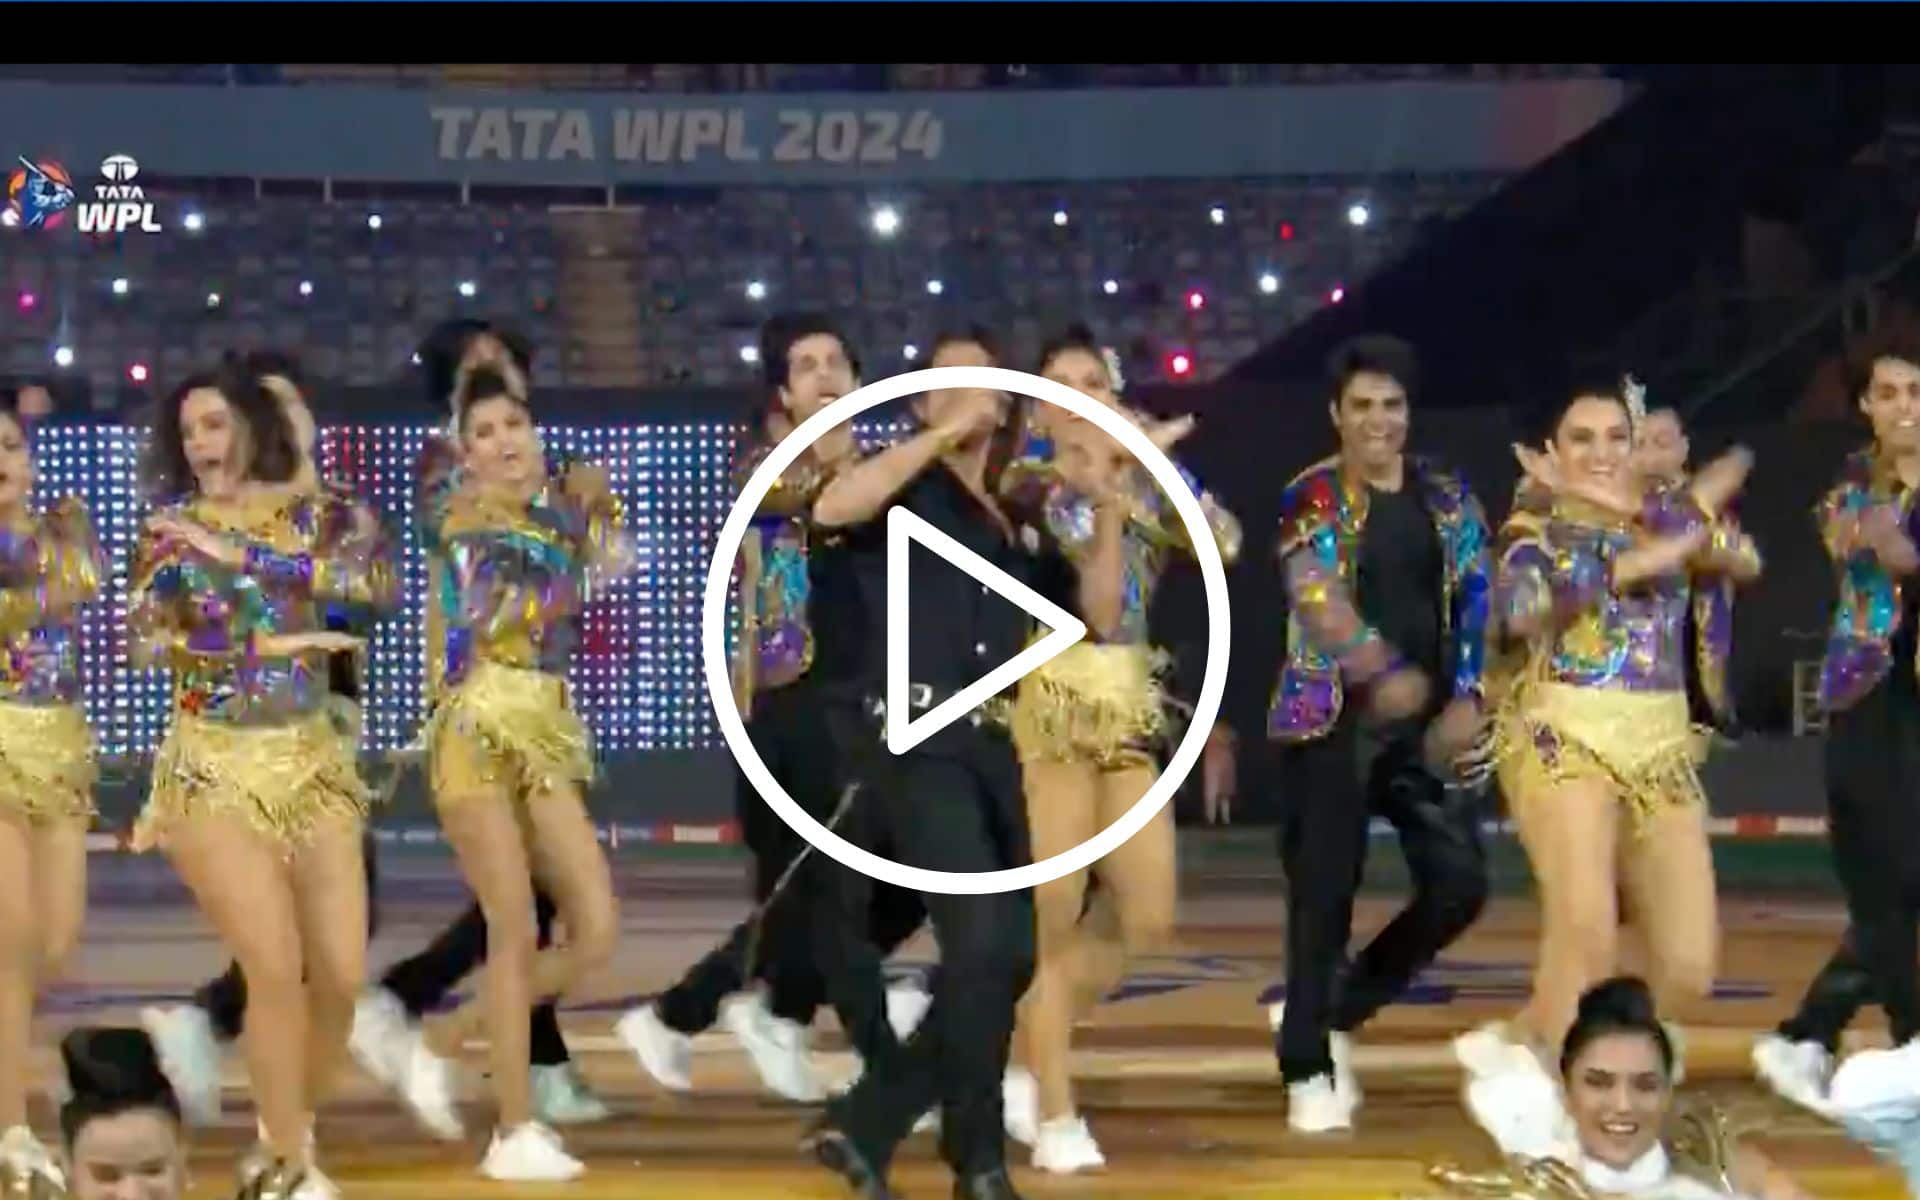 [Watch] Shah Rukh Khan Dazzles In WPL 2024 Opening Ceremony